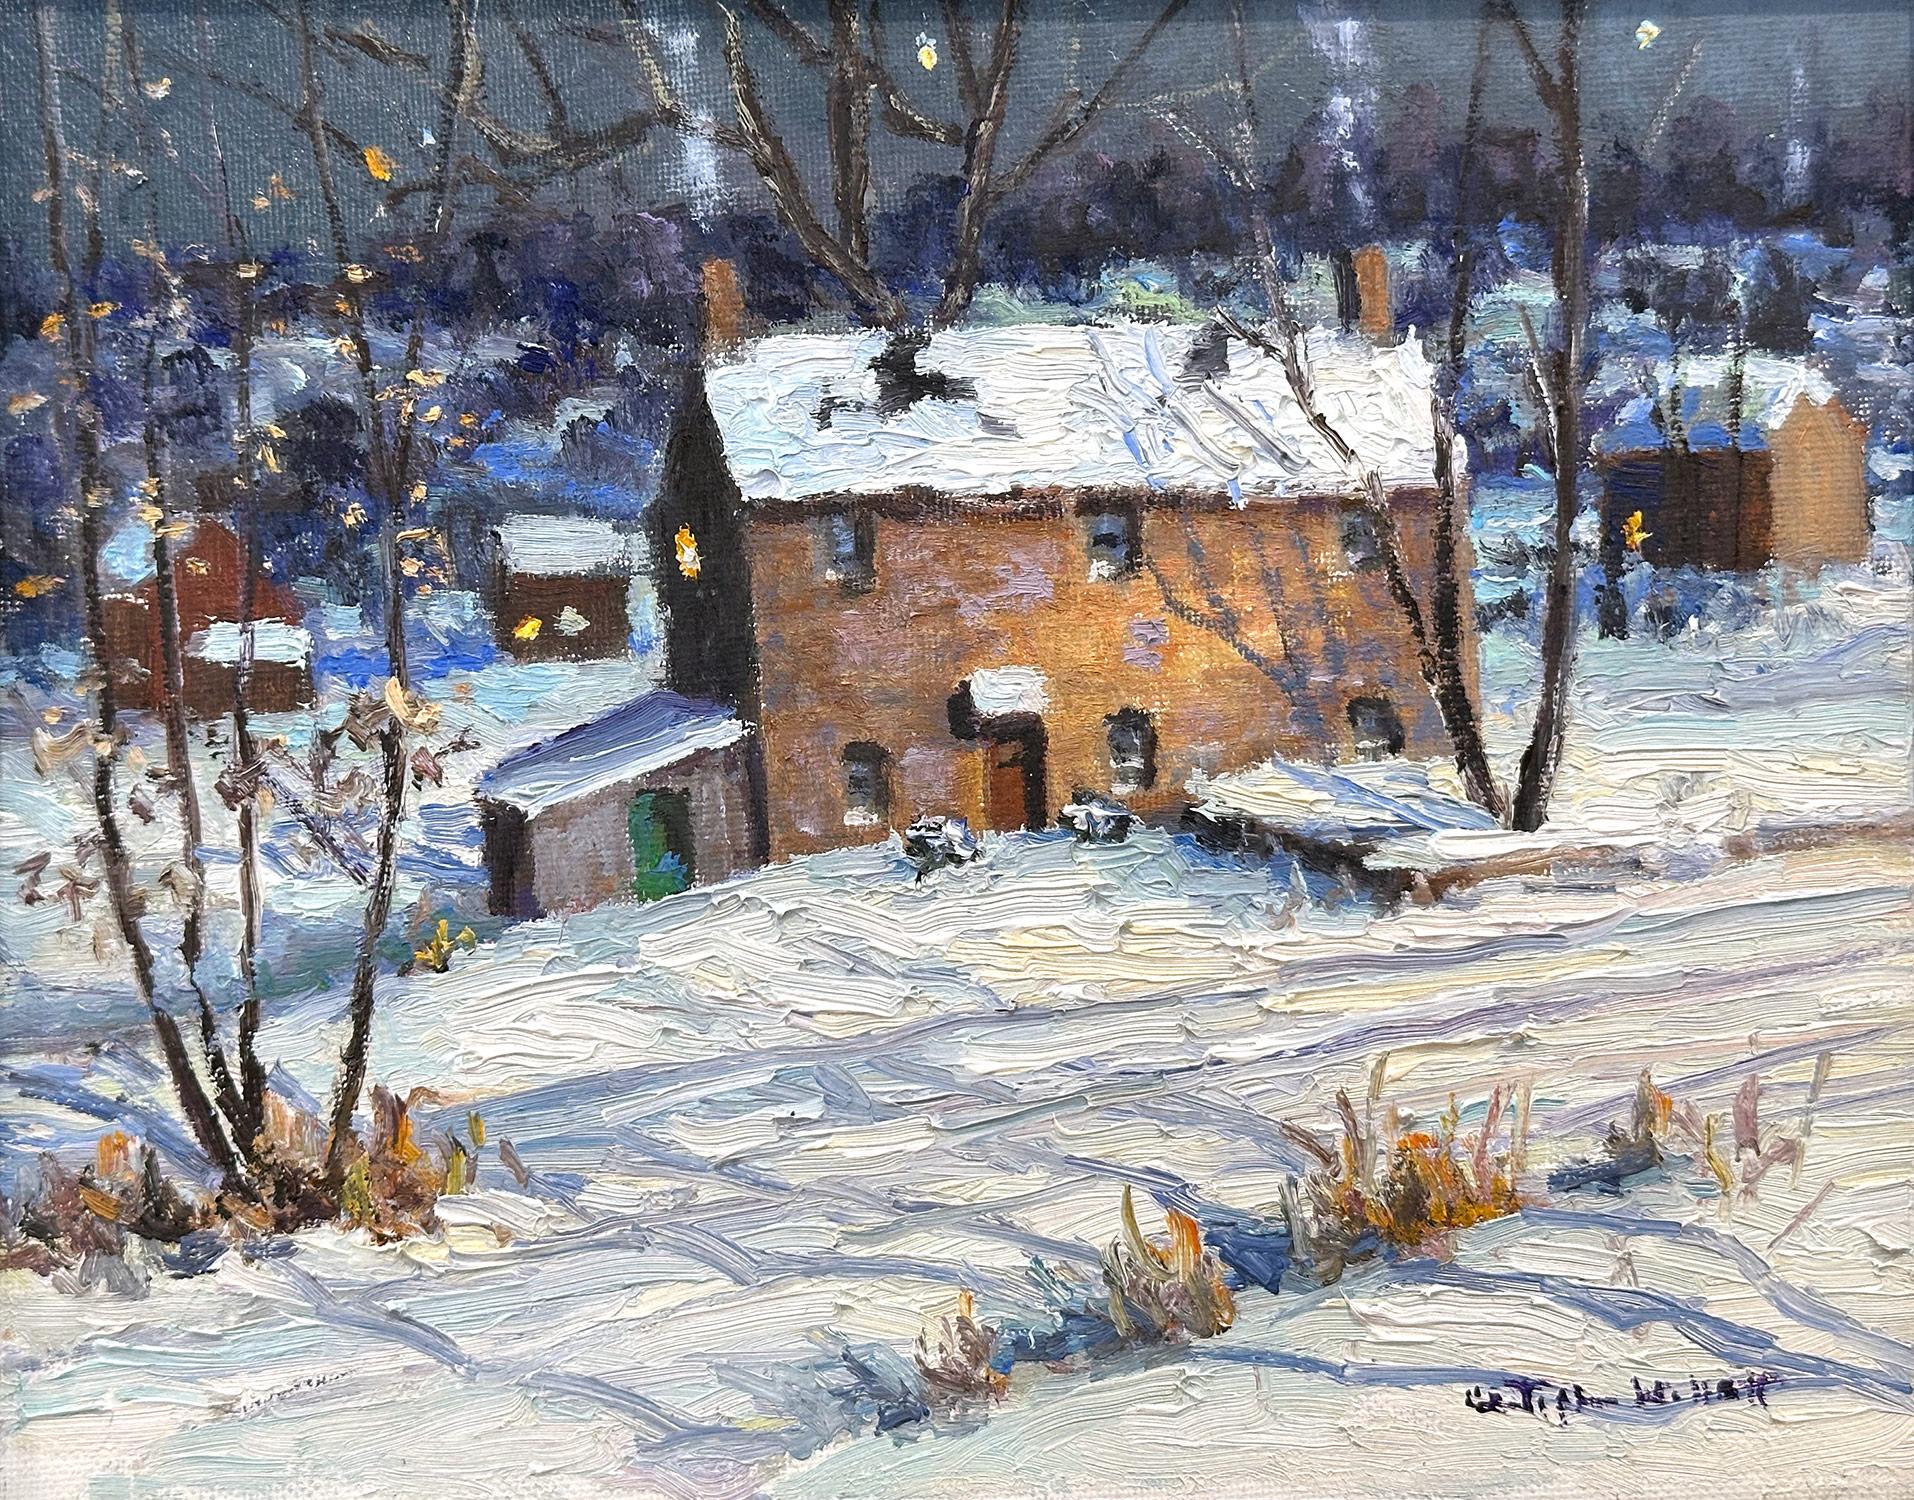 Impressionist winter pastoral scene of a quaint snow covered home by theBuckingham, Bucks County, PA. Willett has portrayed this charming scene in a most intimate, yet energetic way, and has packed much feeling into this miniature work. It is almost